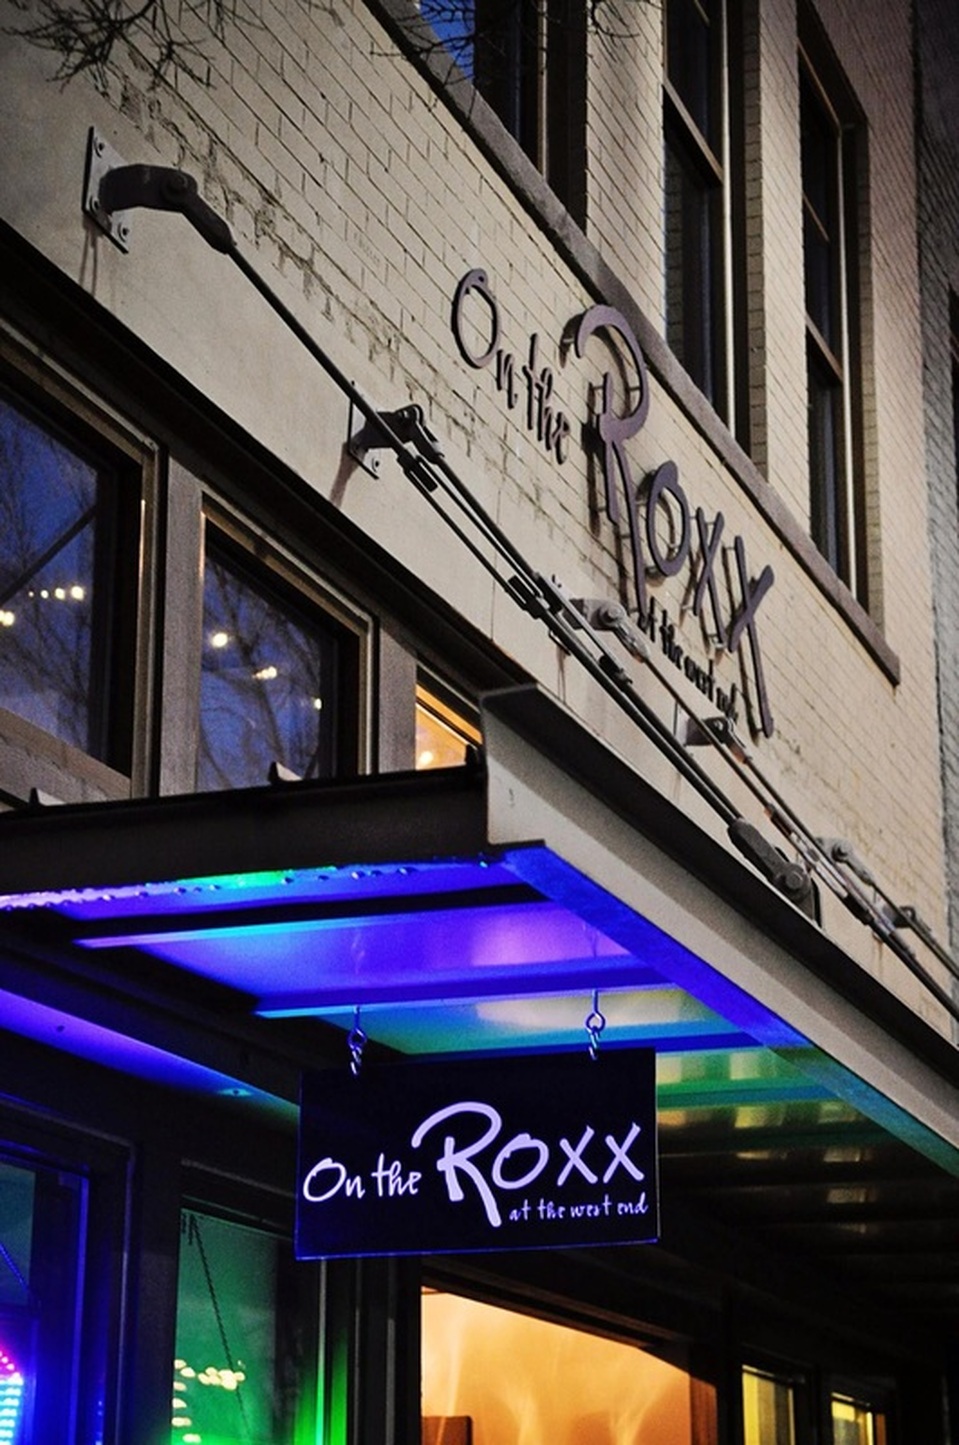 On The Roxx at the West End Downtown Greenville bar and restaurant exterior view